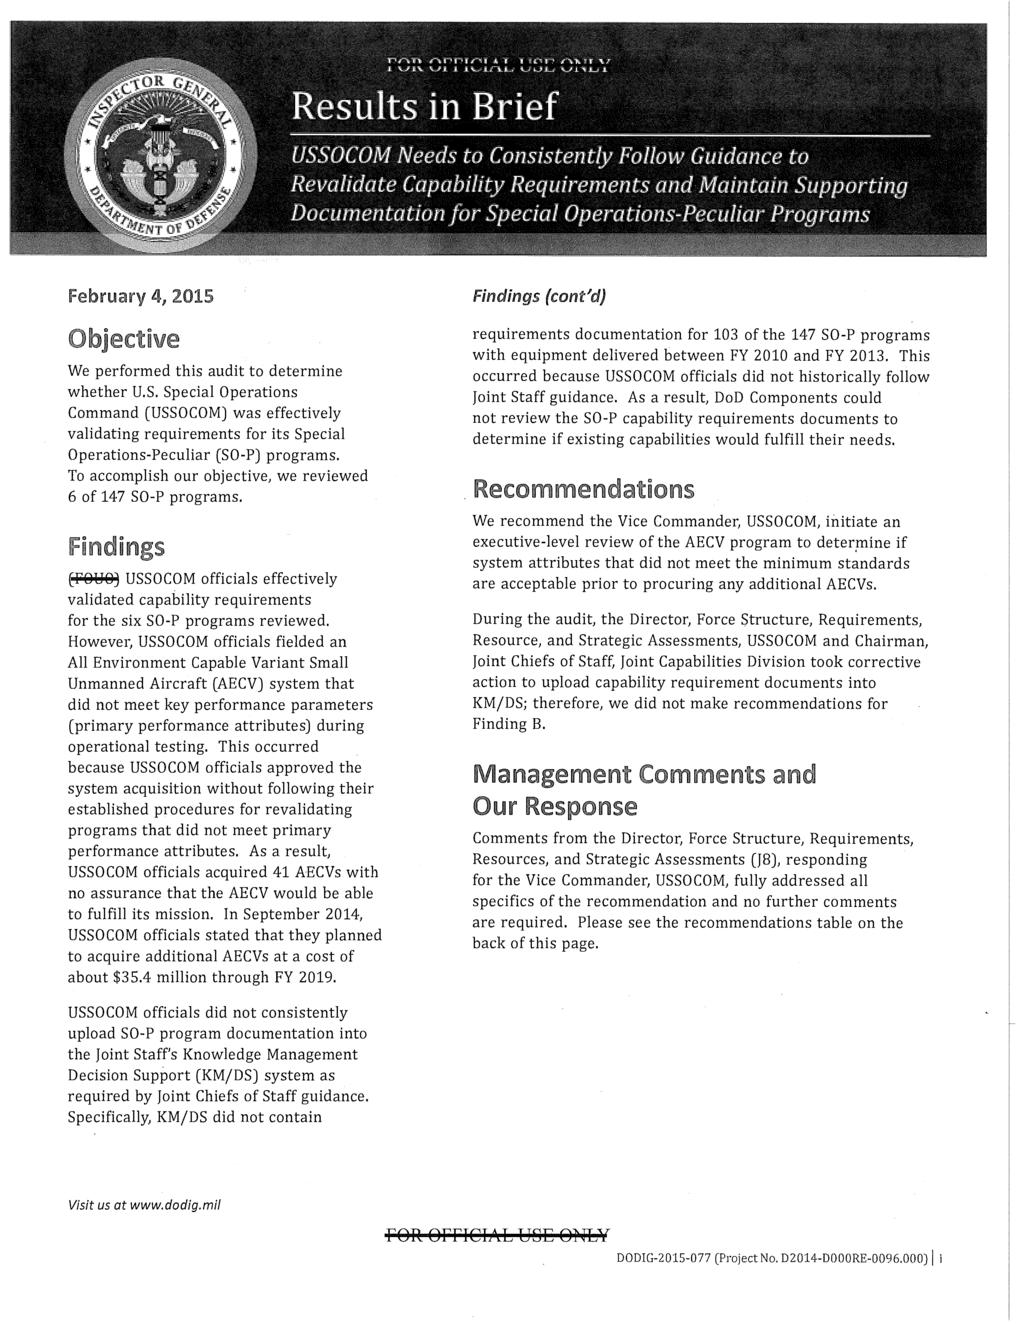 February 4, We performed this audit to determine whether U.S. Special Operations Command (USSOCOM) was effectively validating requirements for its Special Operations-Peculiar (SO-P) programs.